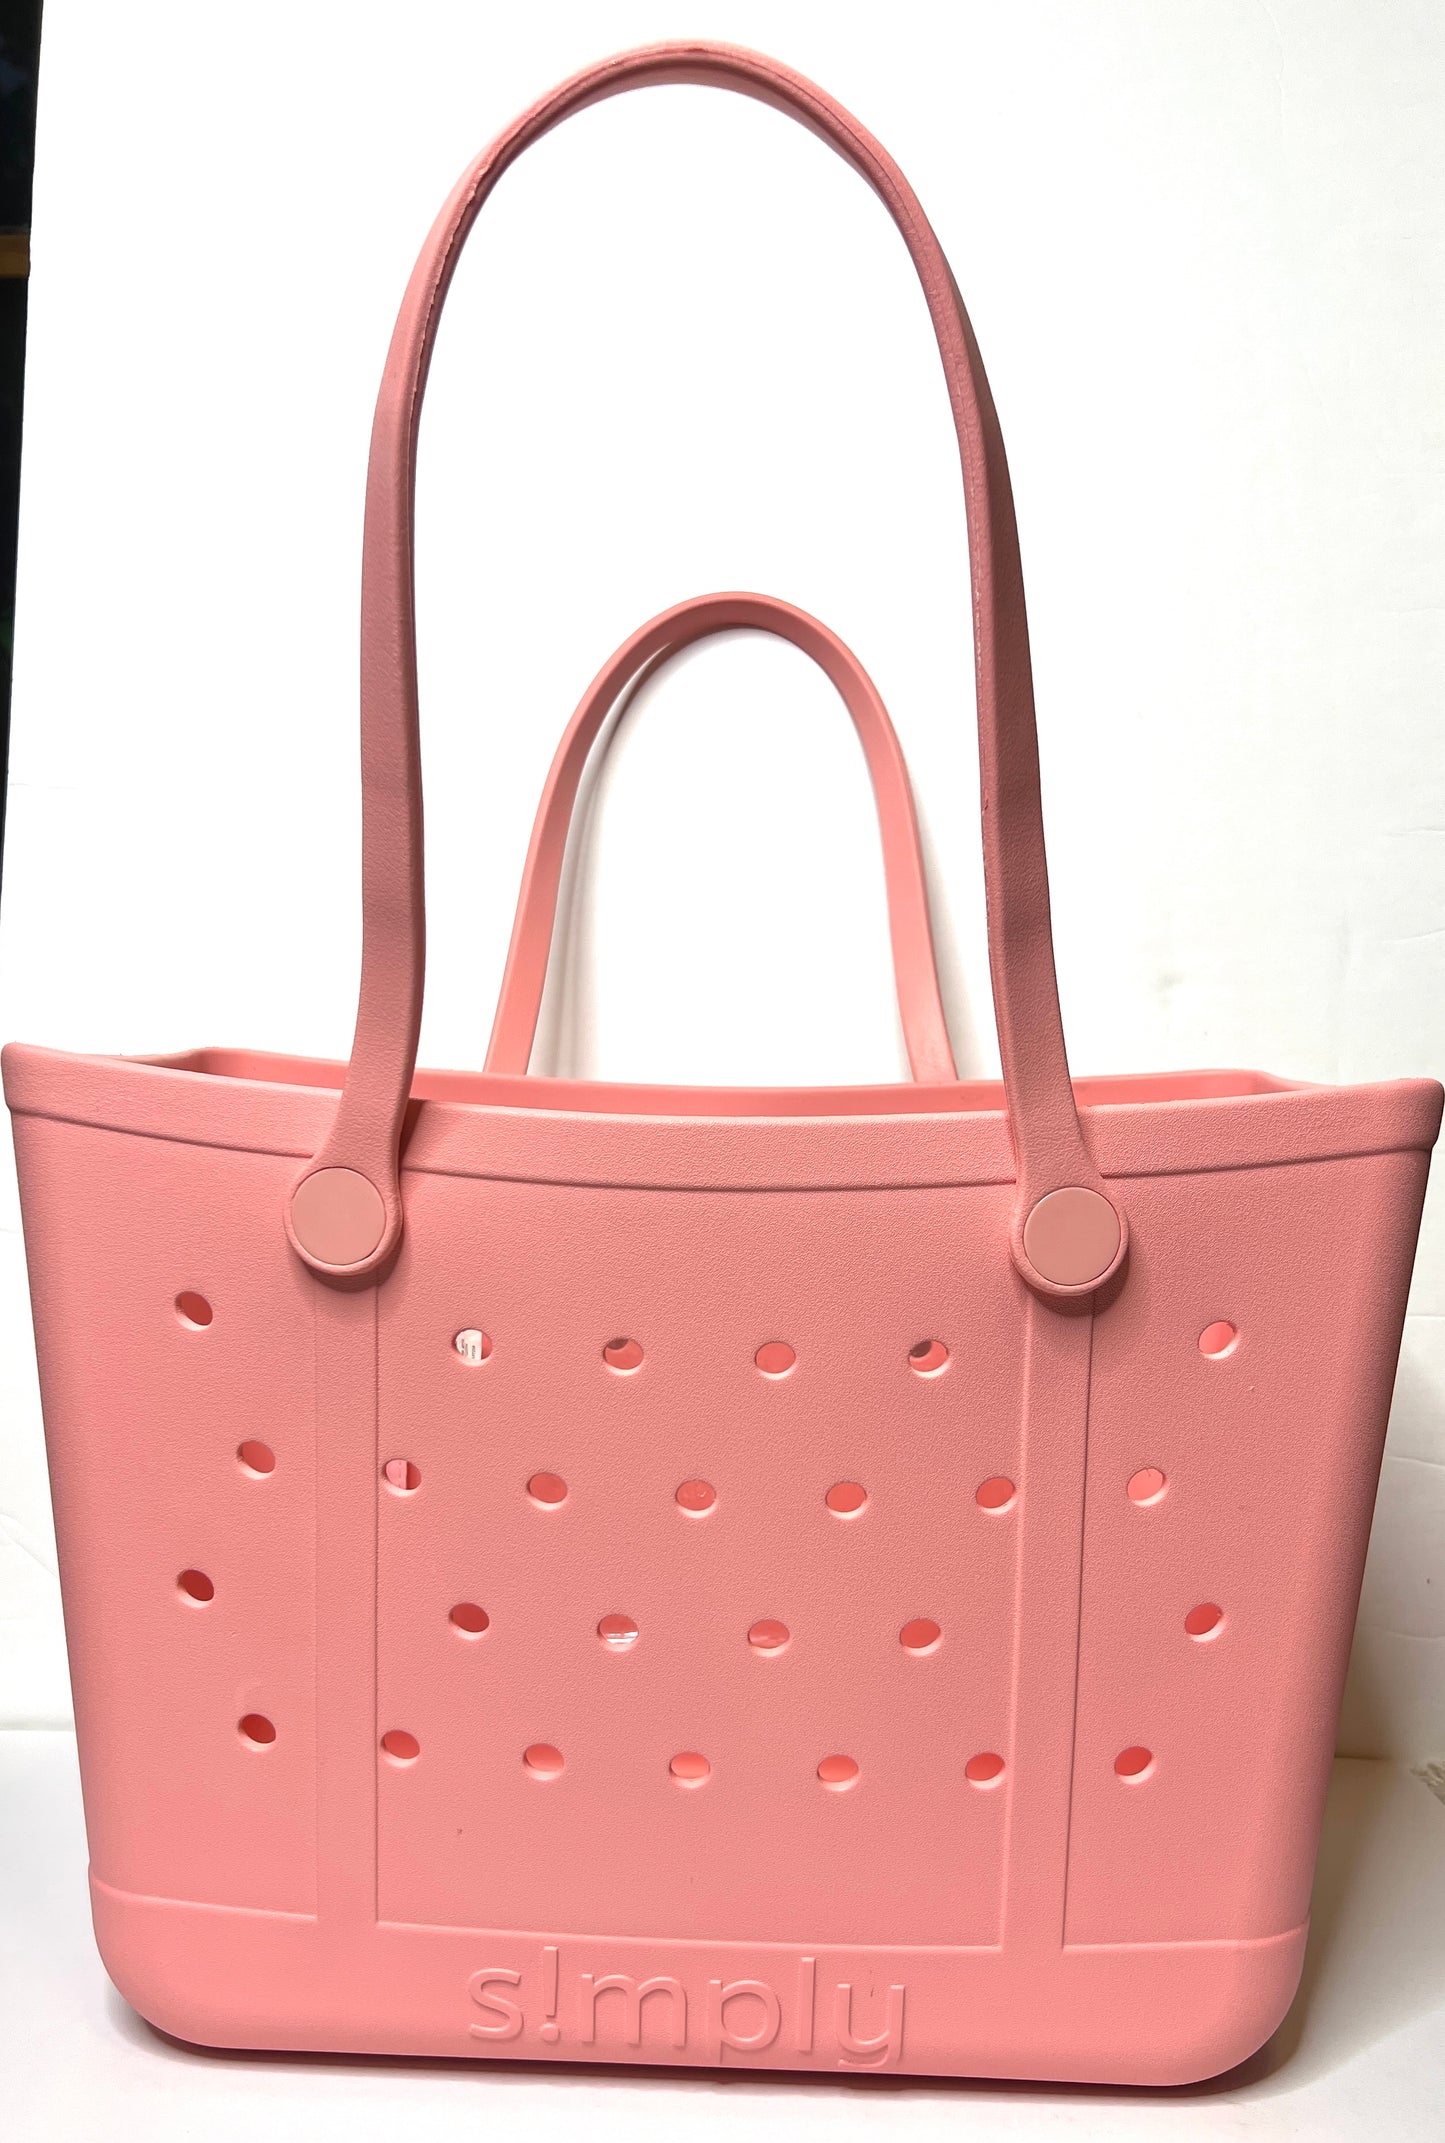 Simply Southern Large Tote